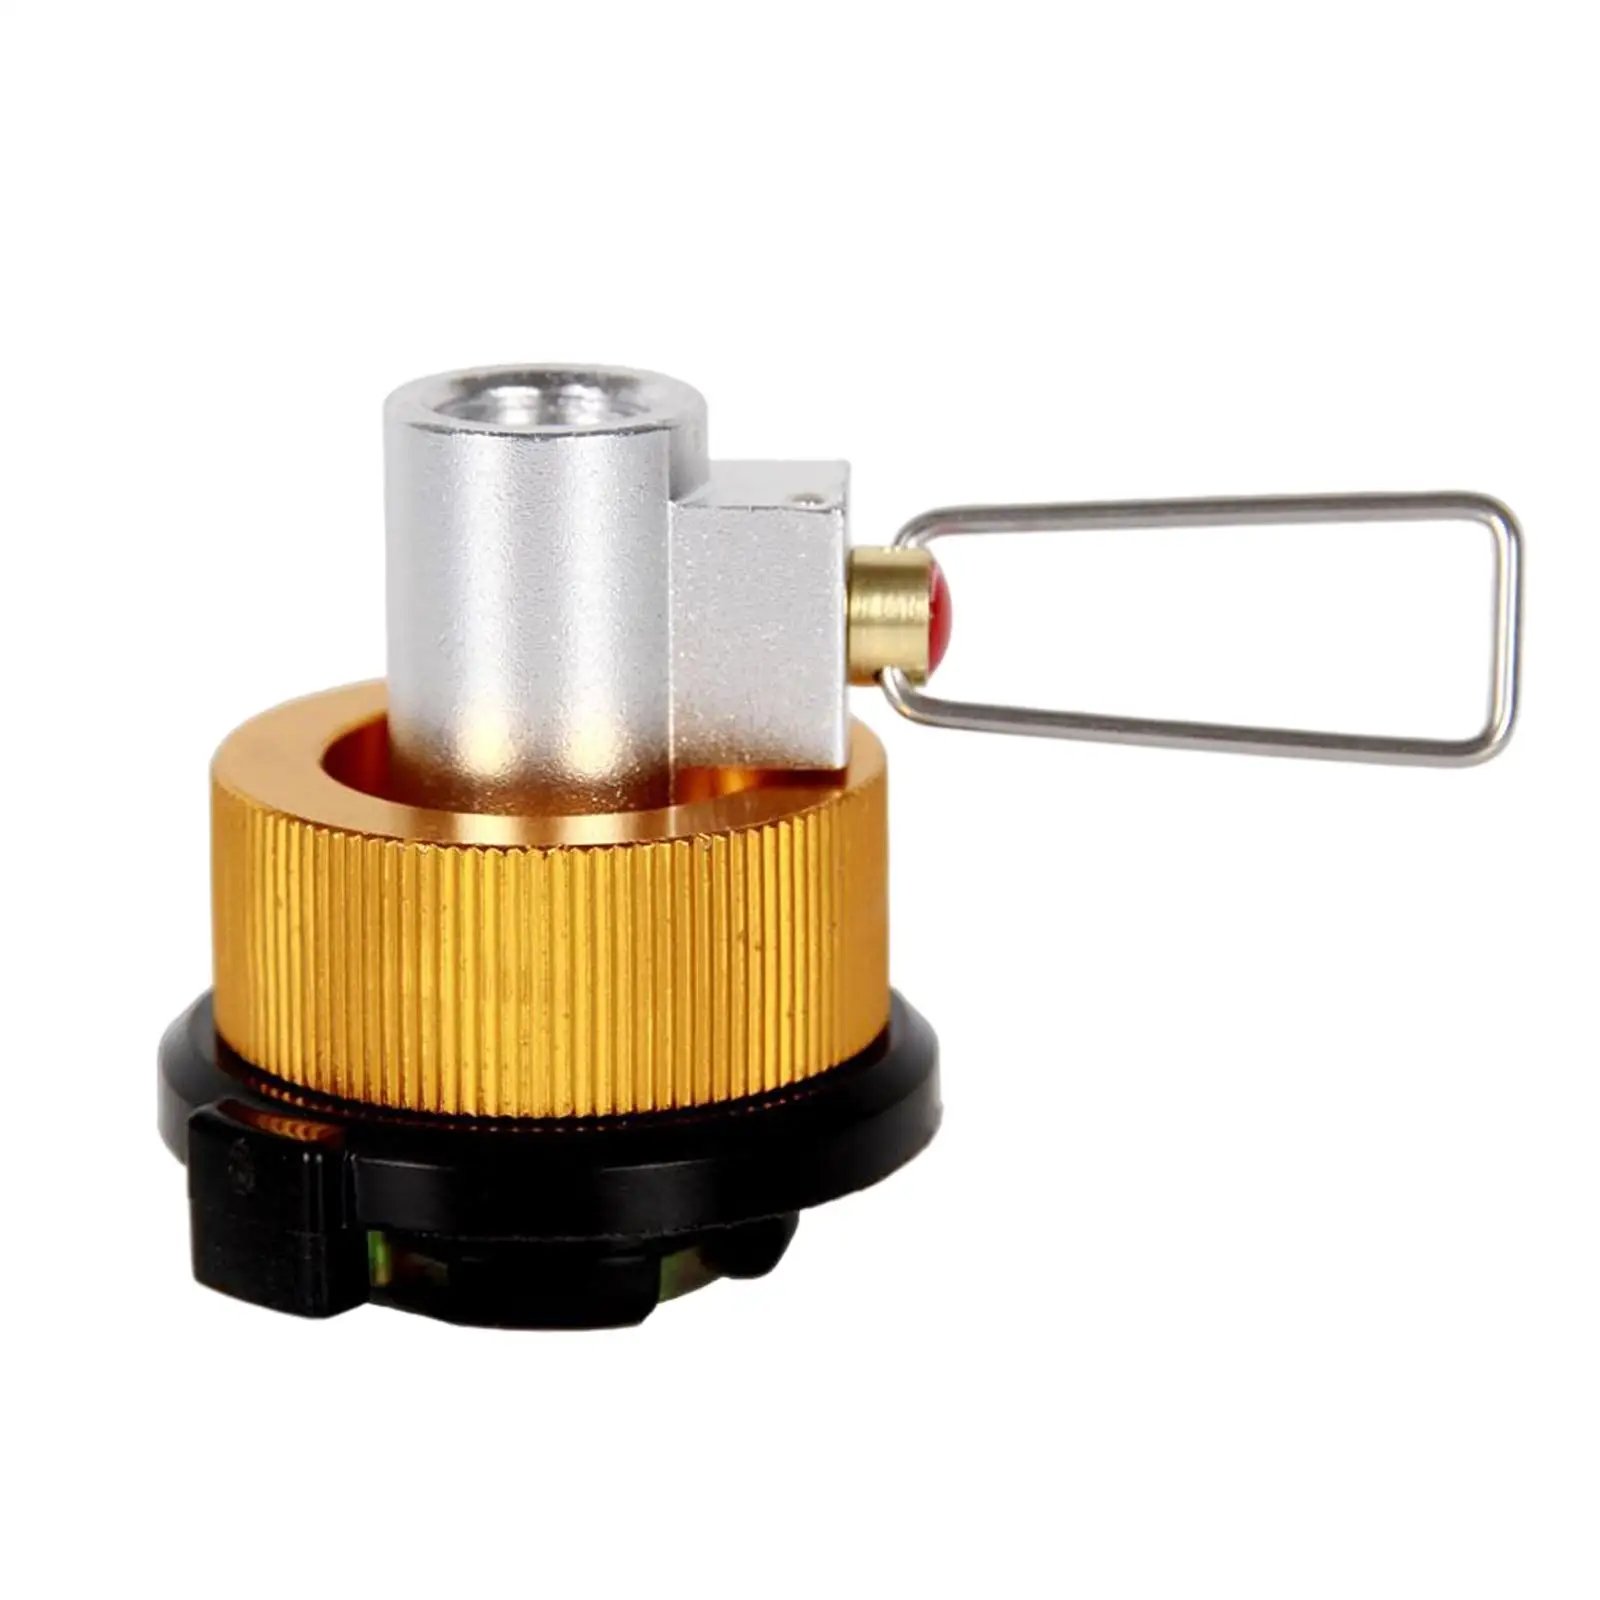 Portable Refill Adapter Gas Converter Fuel Vent Valve Accessories Coupler Cylinder for Output Fishing Hiking